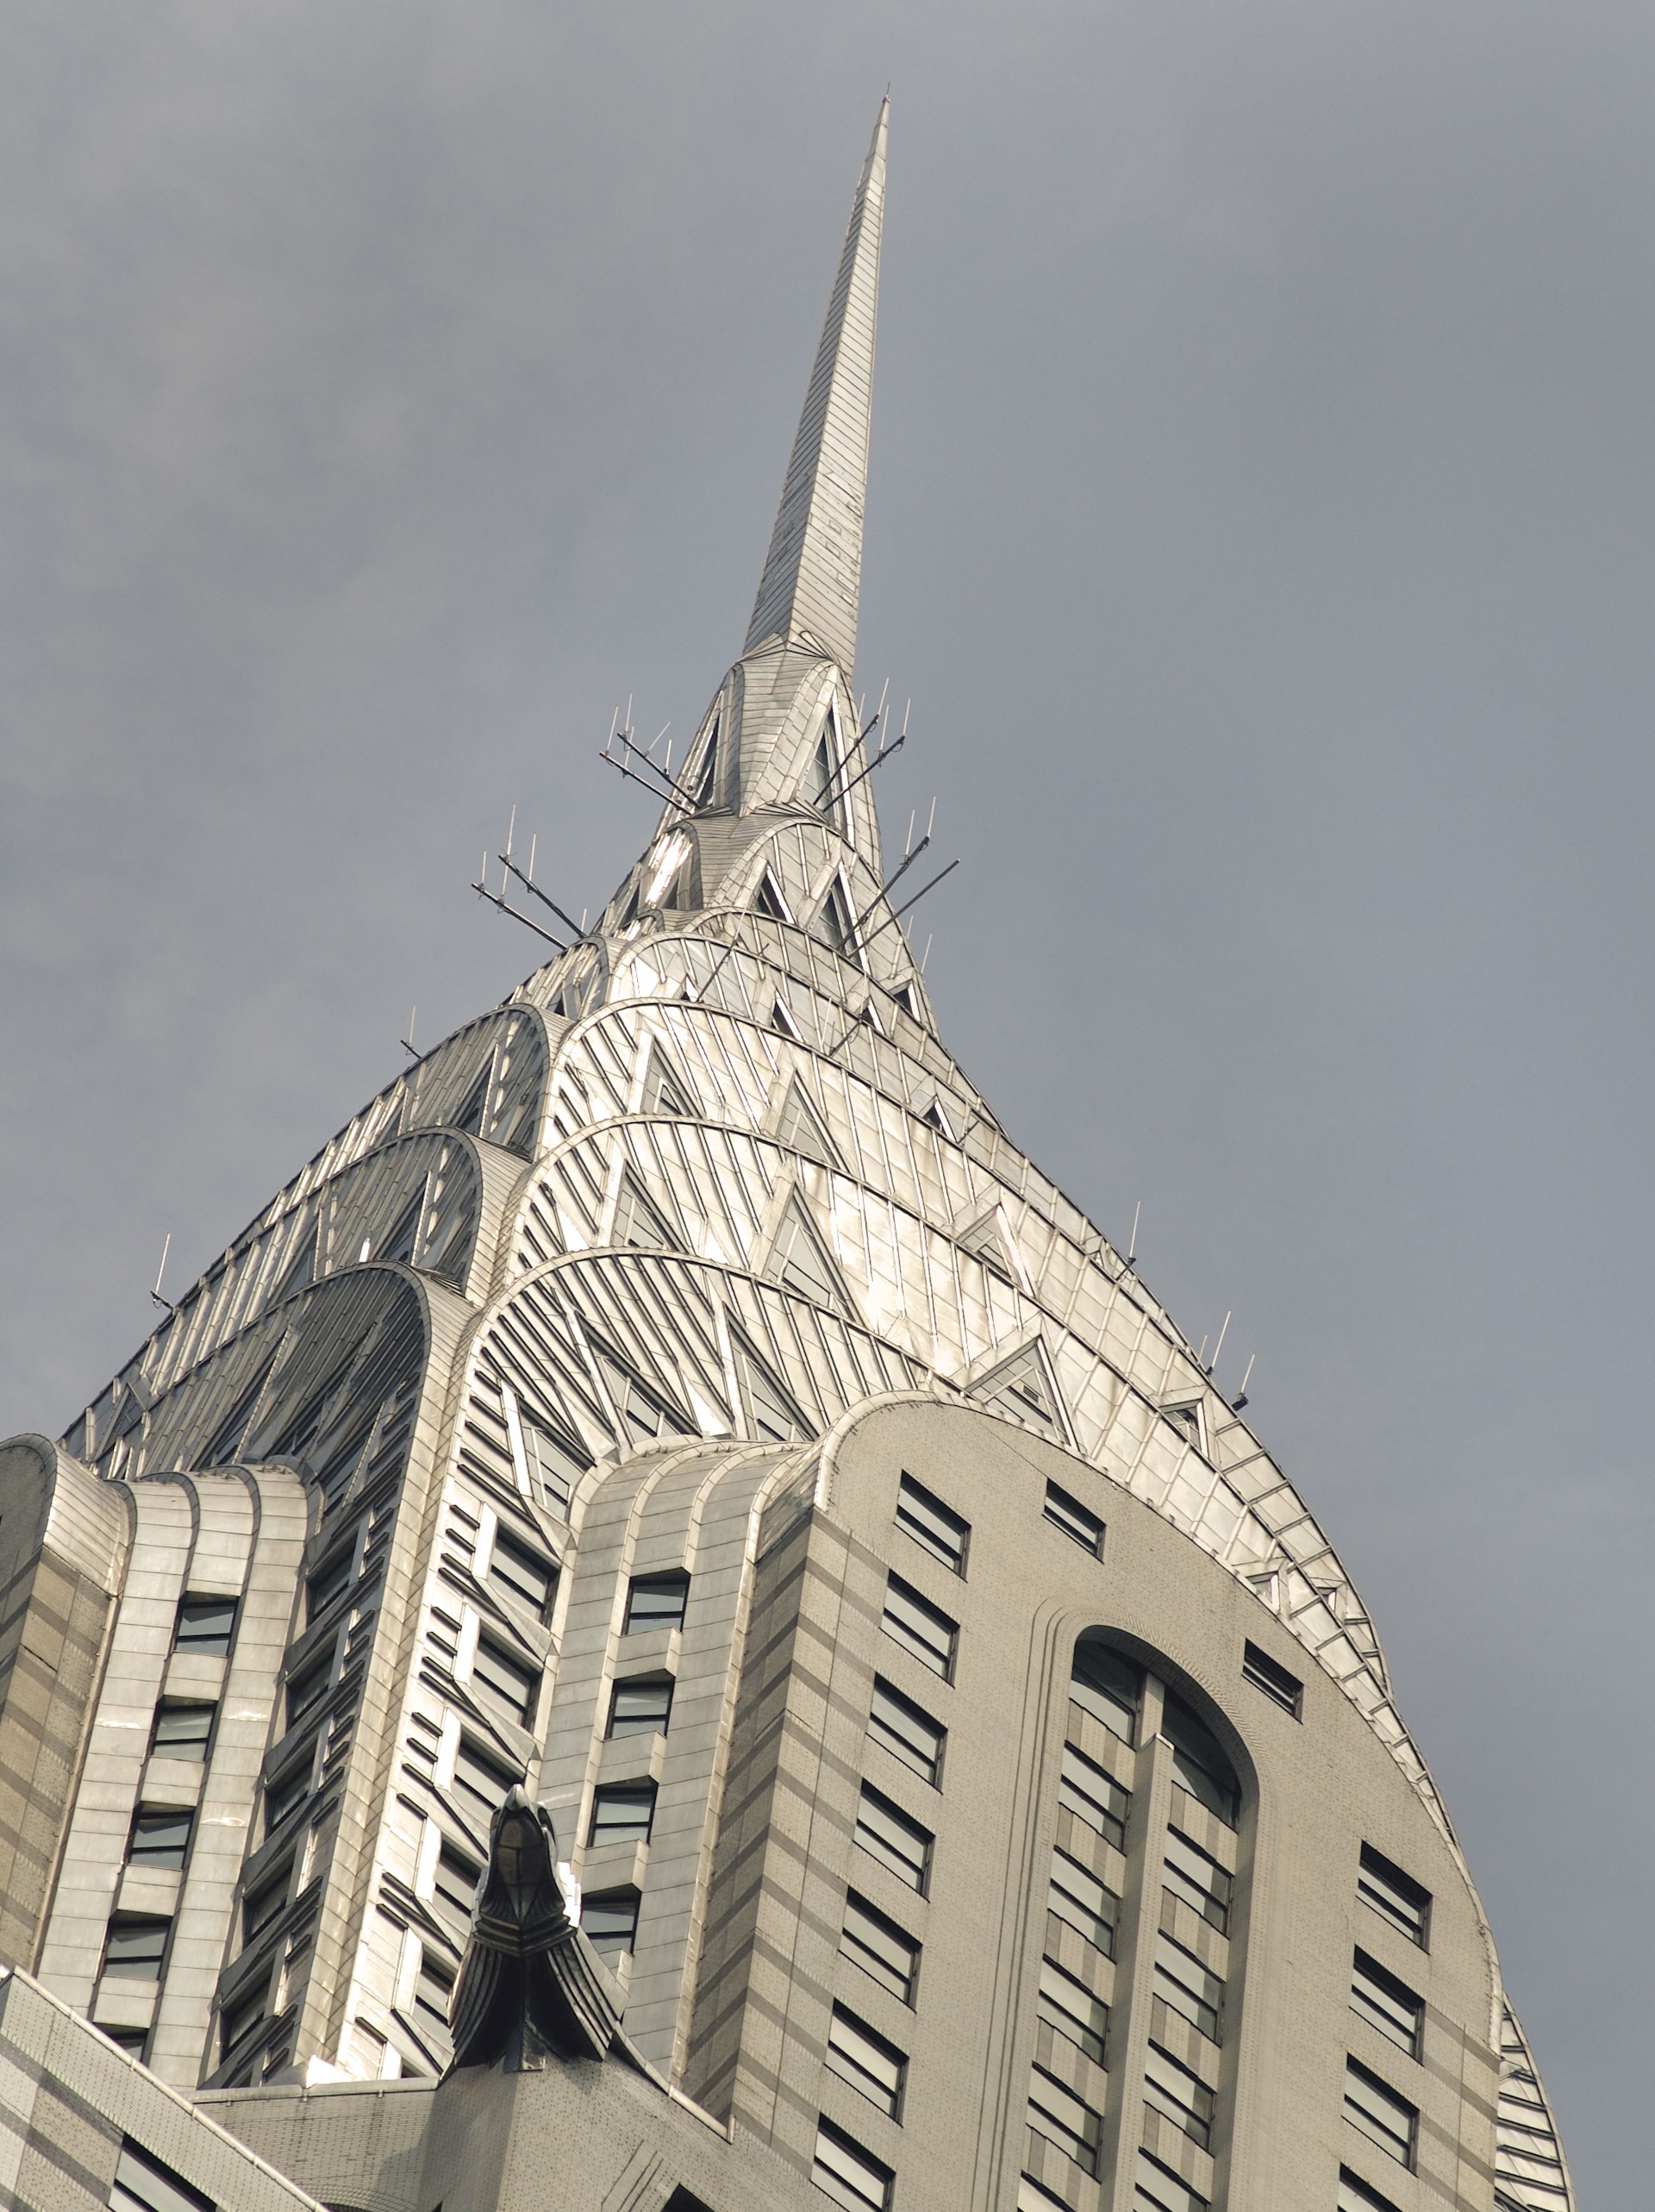 Nickel-containing stainless steel in buildings are still in use after 50 years, in some cases even more than 100 years - The nickel-containing stainless steel forming the shining crown of the Chrysler building is still as pristine and beautiful as the day it was completed in 1930.